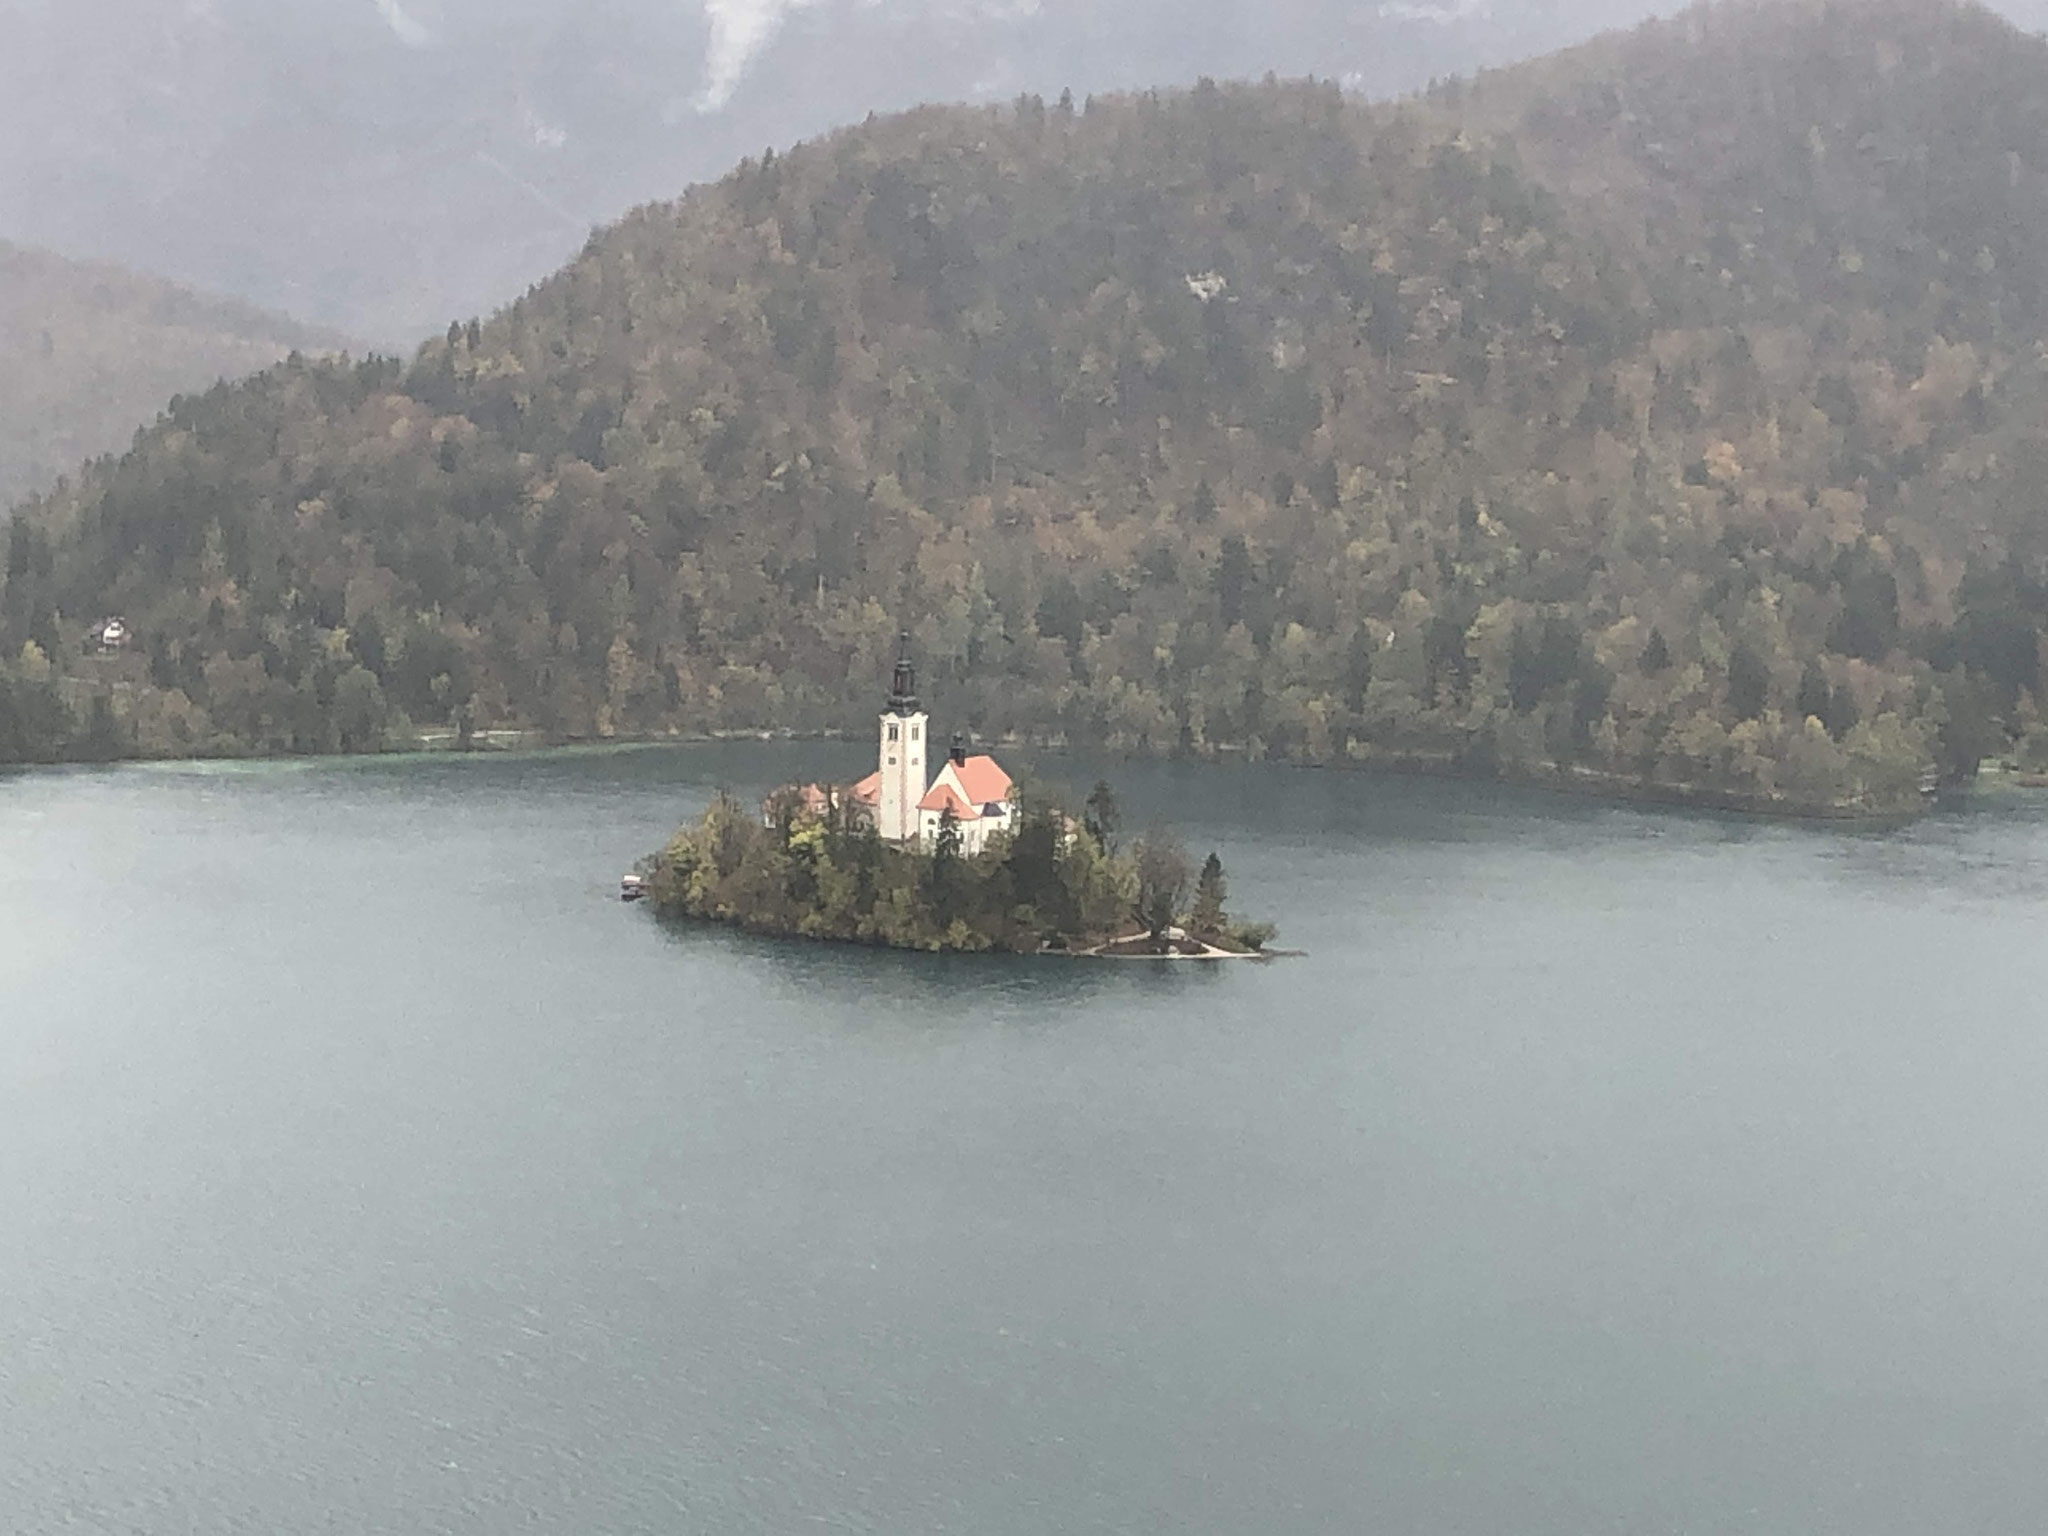 We took a boat to this island in the middle of Lake Bled.